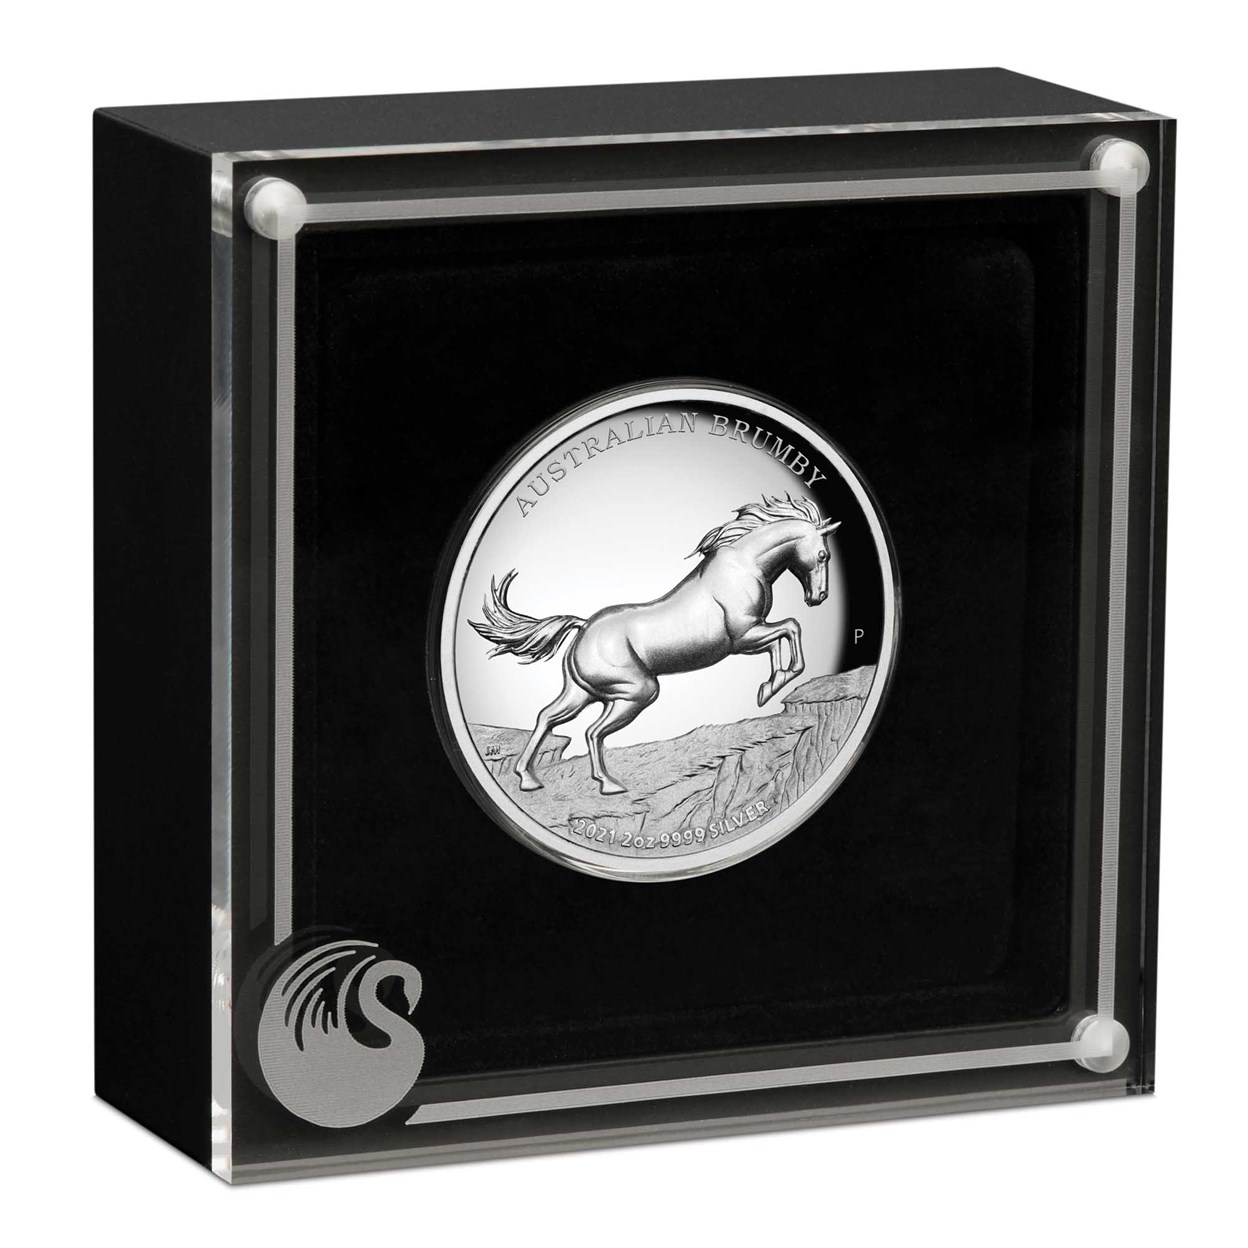 04 2021 AustralianBrumby 2oz Silver Proof HighRelief Coin InCase HighRes